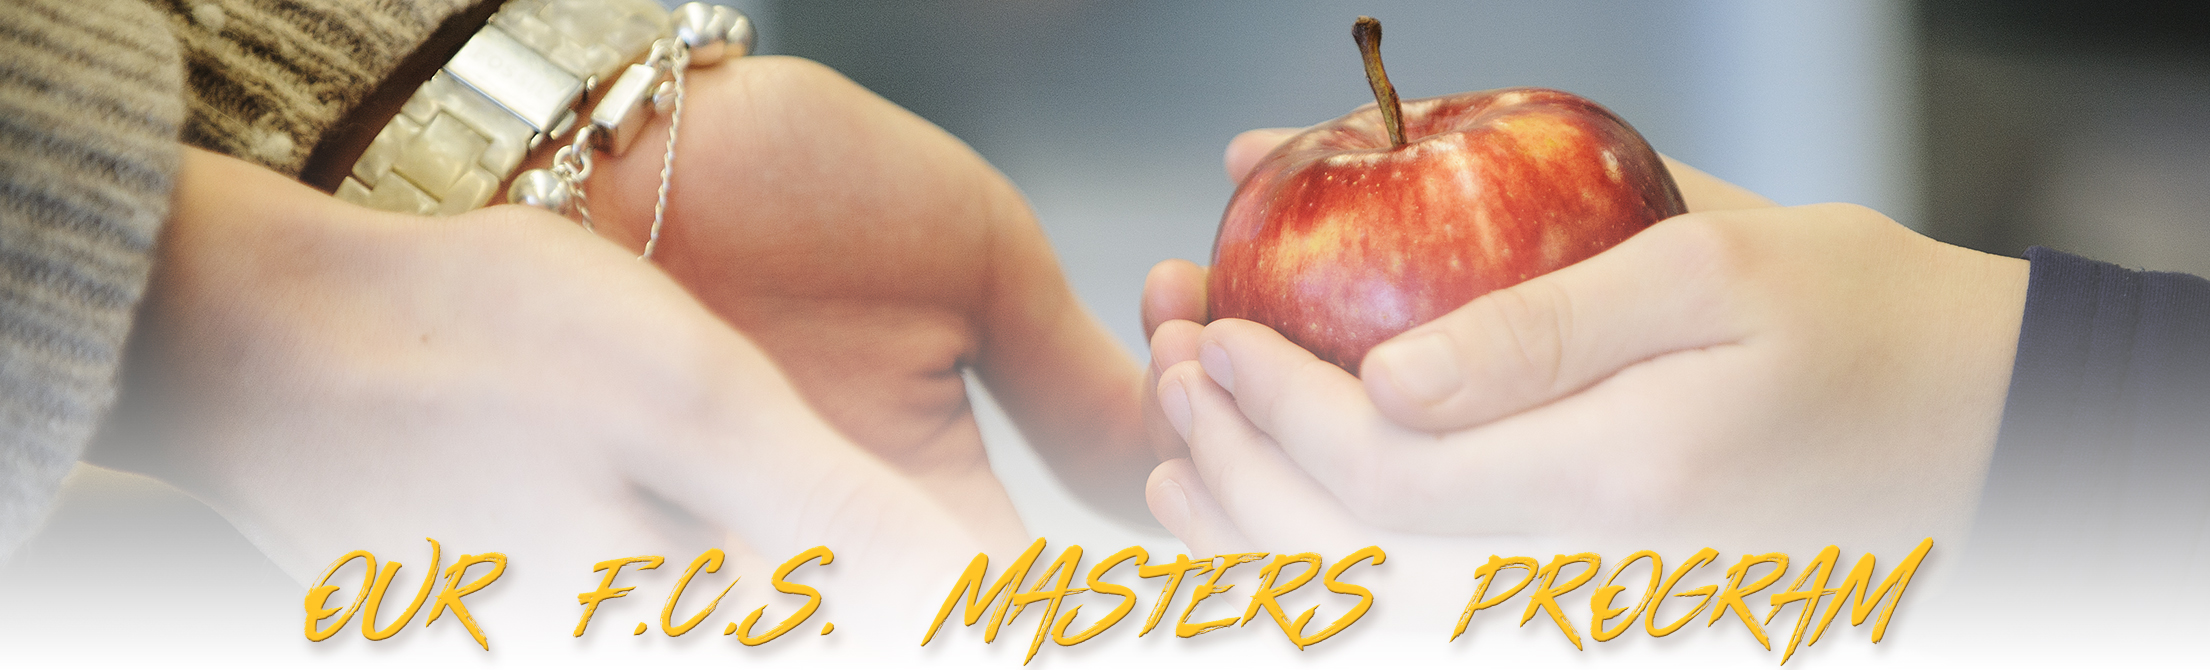 a child handing an apple to one of our faculty in the Department of Family and Consumer Sciences masters program with text that says "our FCS masters program"